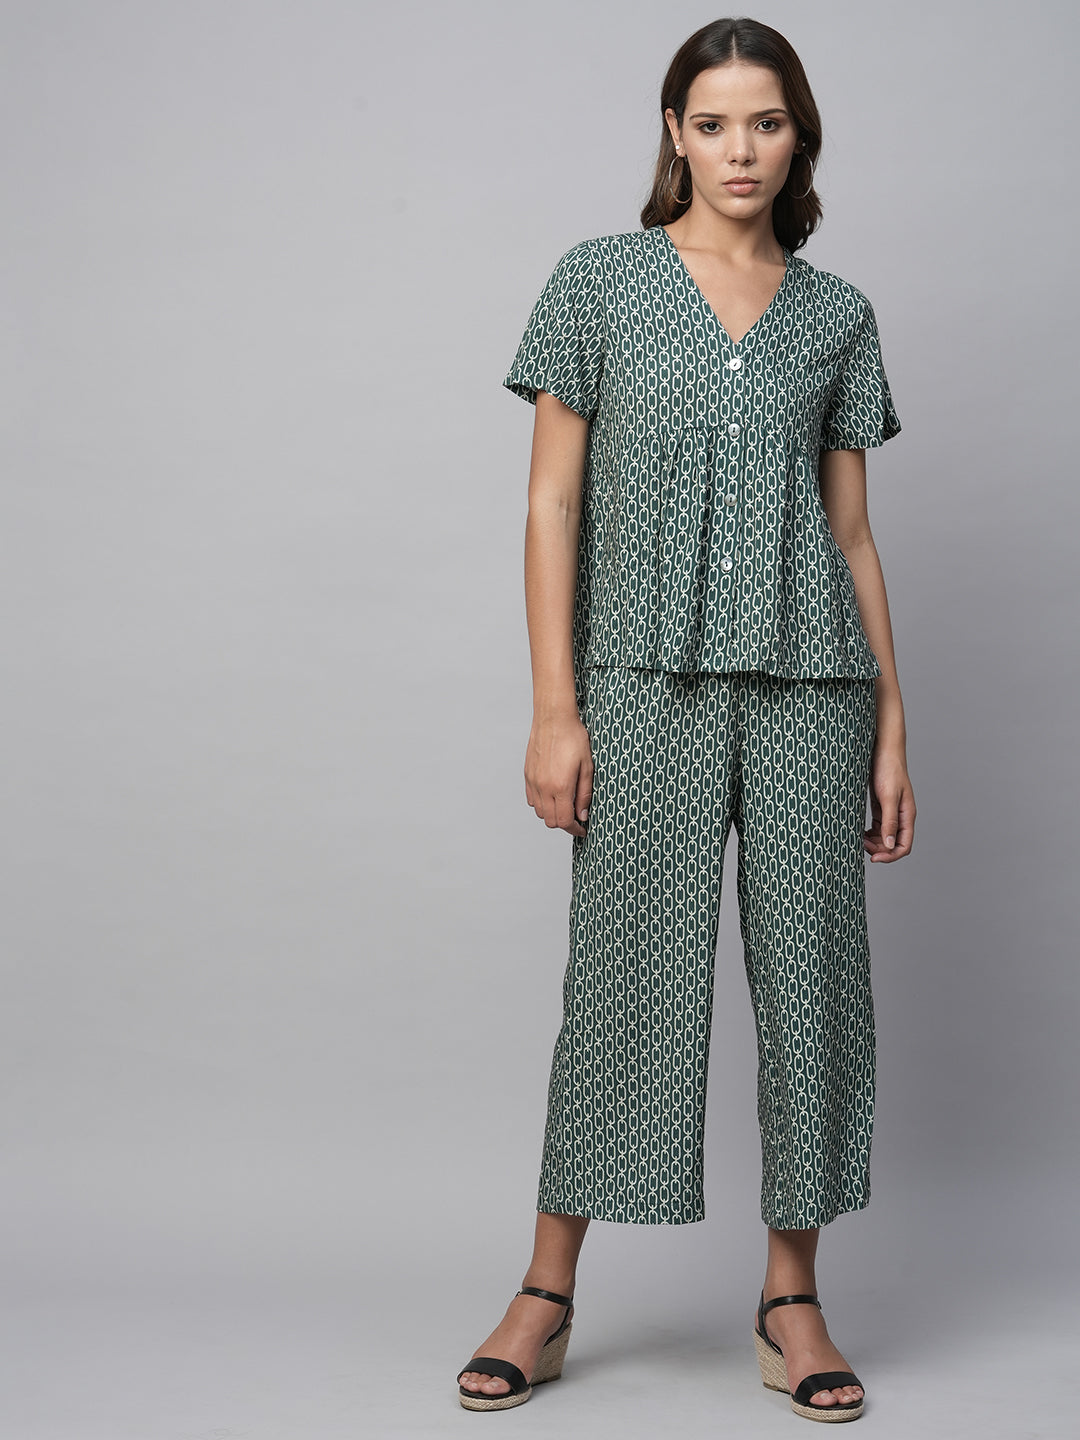 Printed Viscose Basque Swing Top With Pull On Wide Leg Cropped Pants